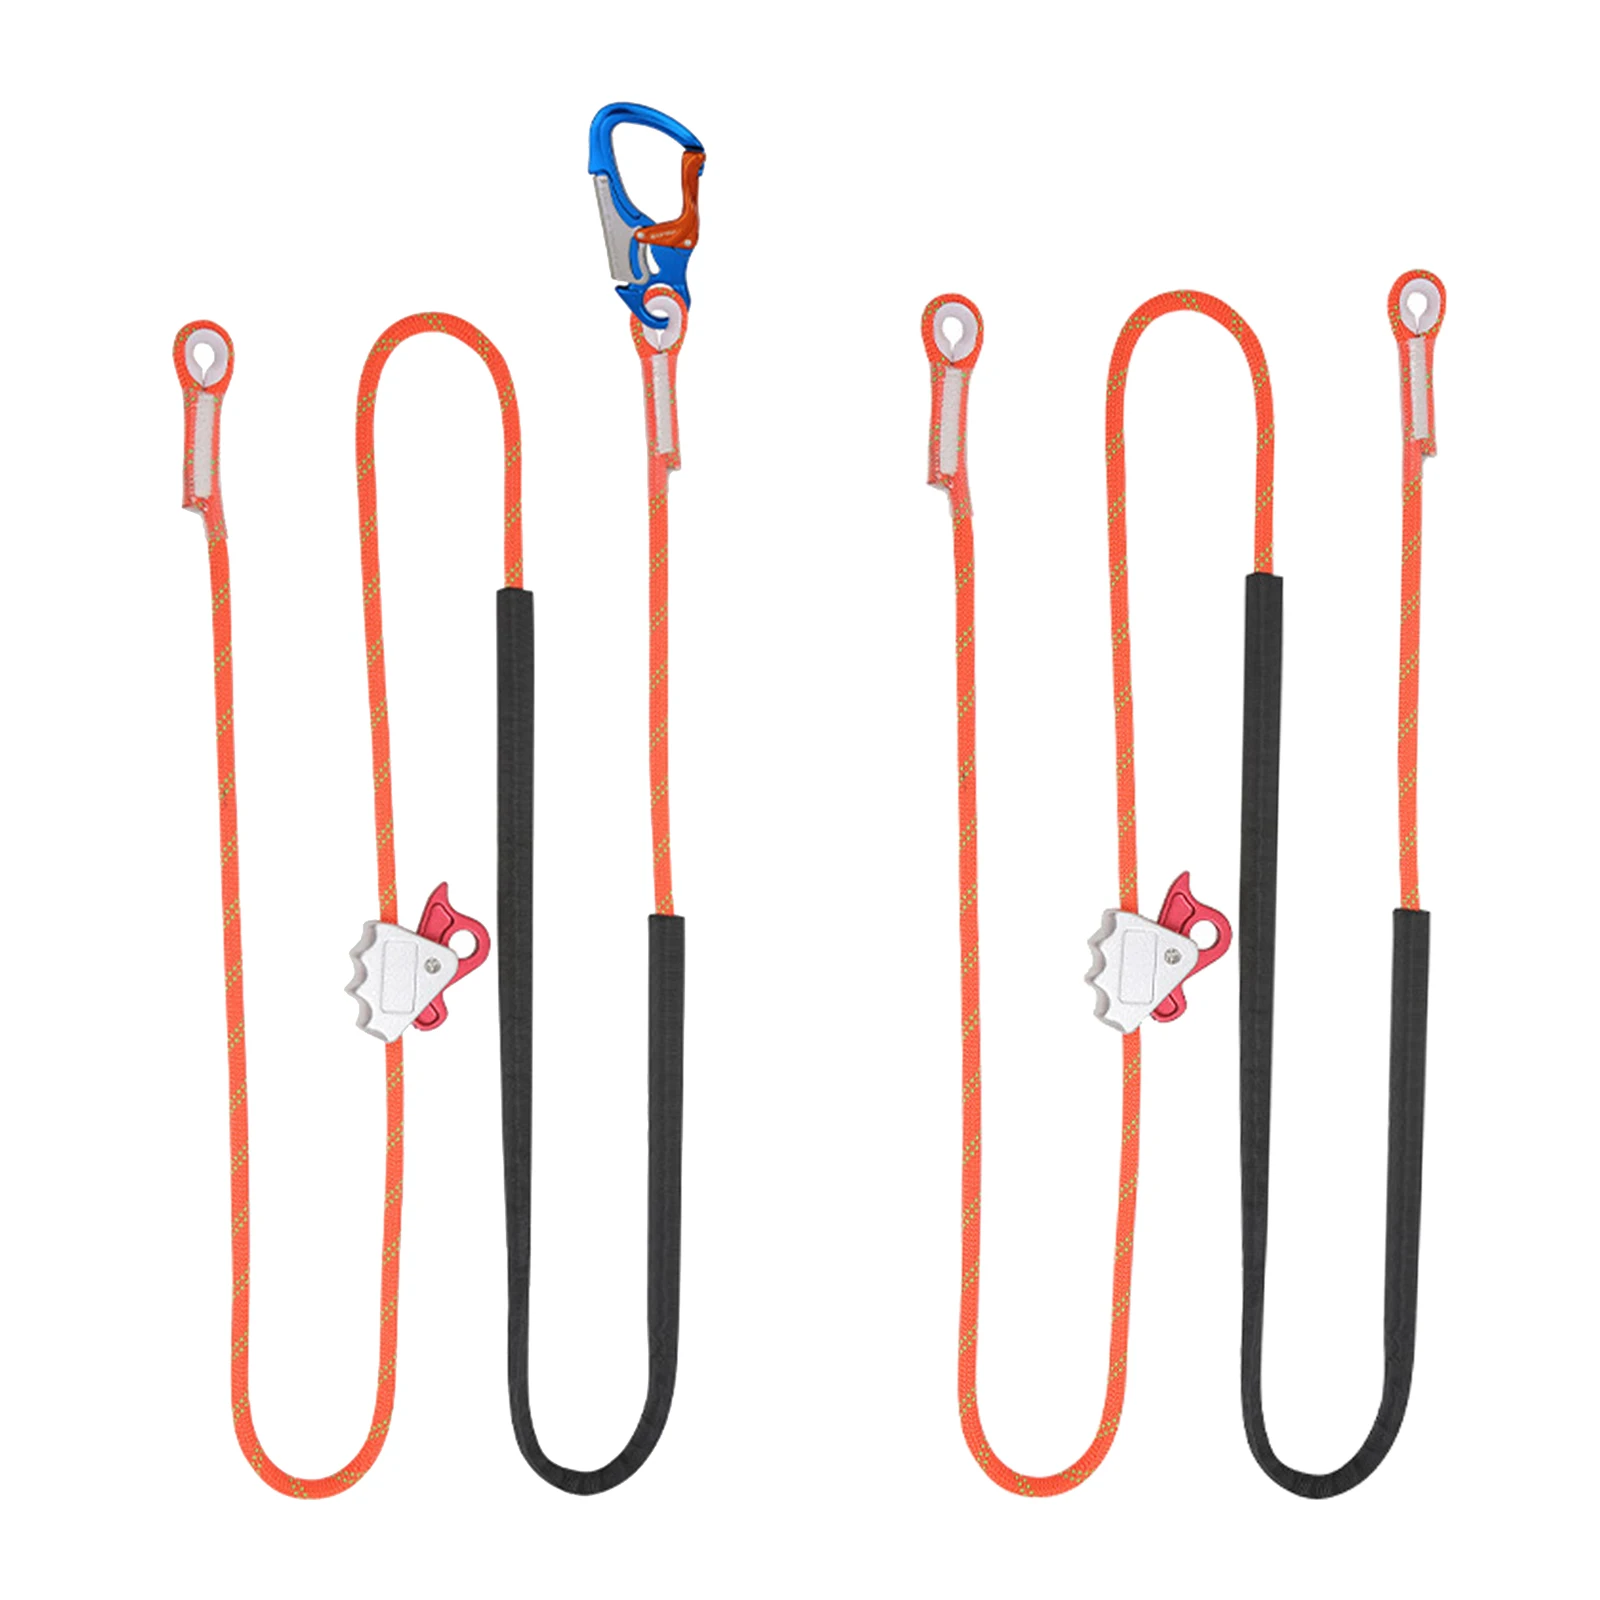 Outdoor Positioning Lanyard with Sturdy Rope Adjustable Restraint Harness Cord for Rock/Tree Climbing Working Fall Protection